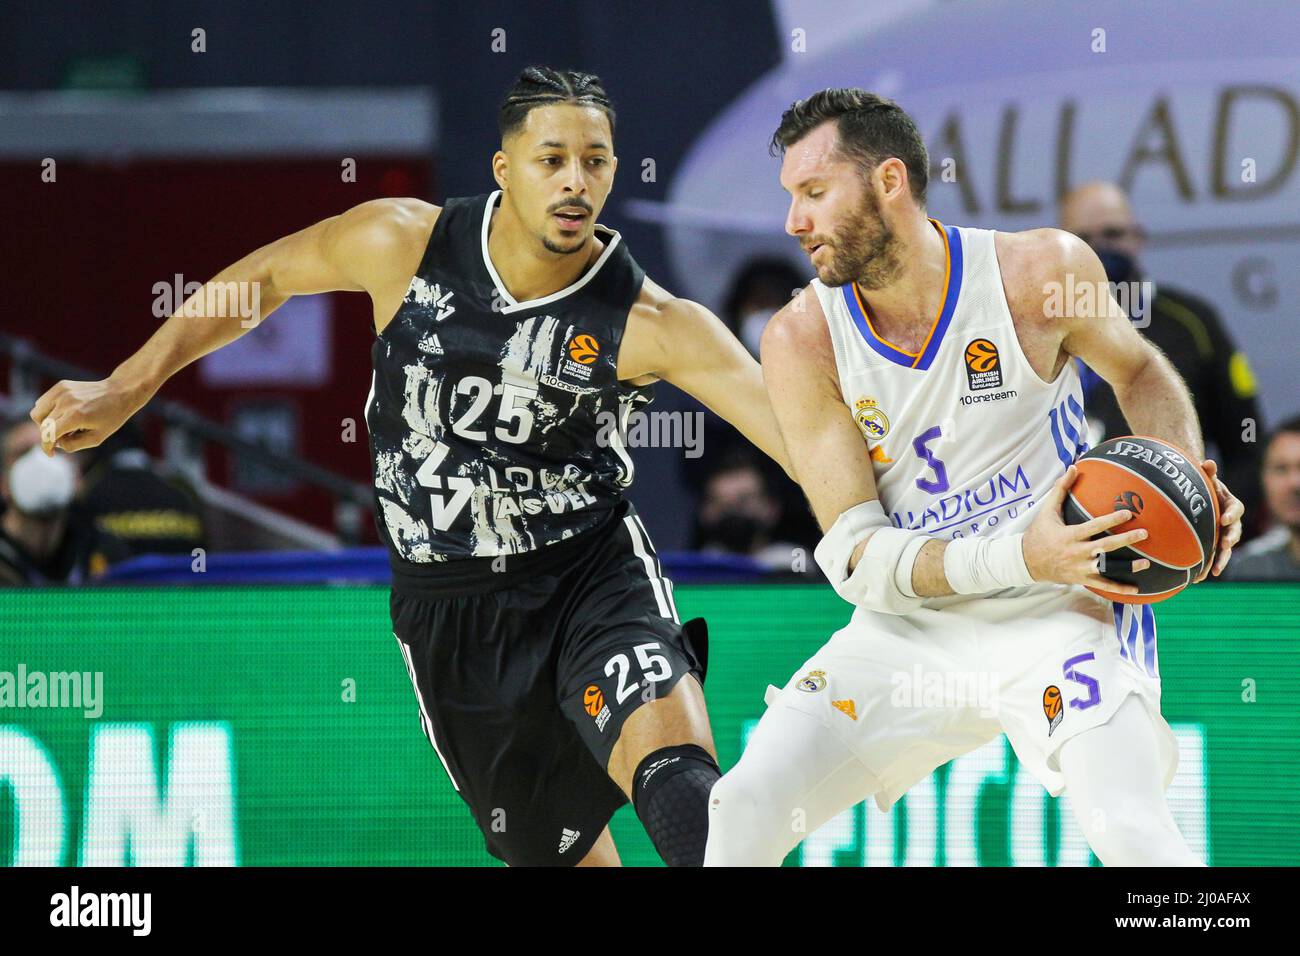 Madrid, Spain. 17th Mar, 2022. William Howard of Asvel Lyon-Villeurbanne and Rodolfo Fernandez Farres 'Rudy' of Real Madrid during the Turkish Airlines Euroleague basketball match between Real Madrid and Asvel Lyon-Villeurbanne on march 17, 2022 at Wizink Center in Madrid, Spain Credit: Independent Photo Agency/Alamy Live Newss Stock Photo